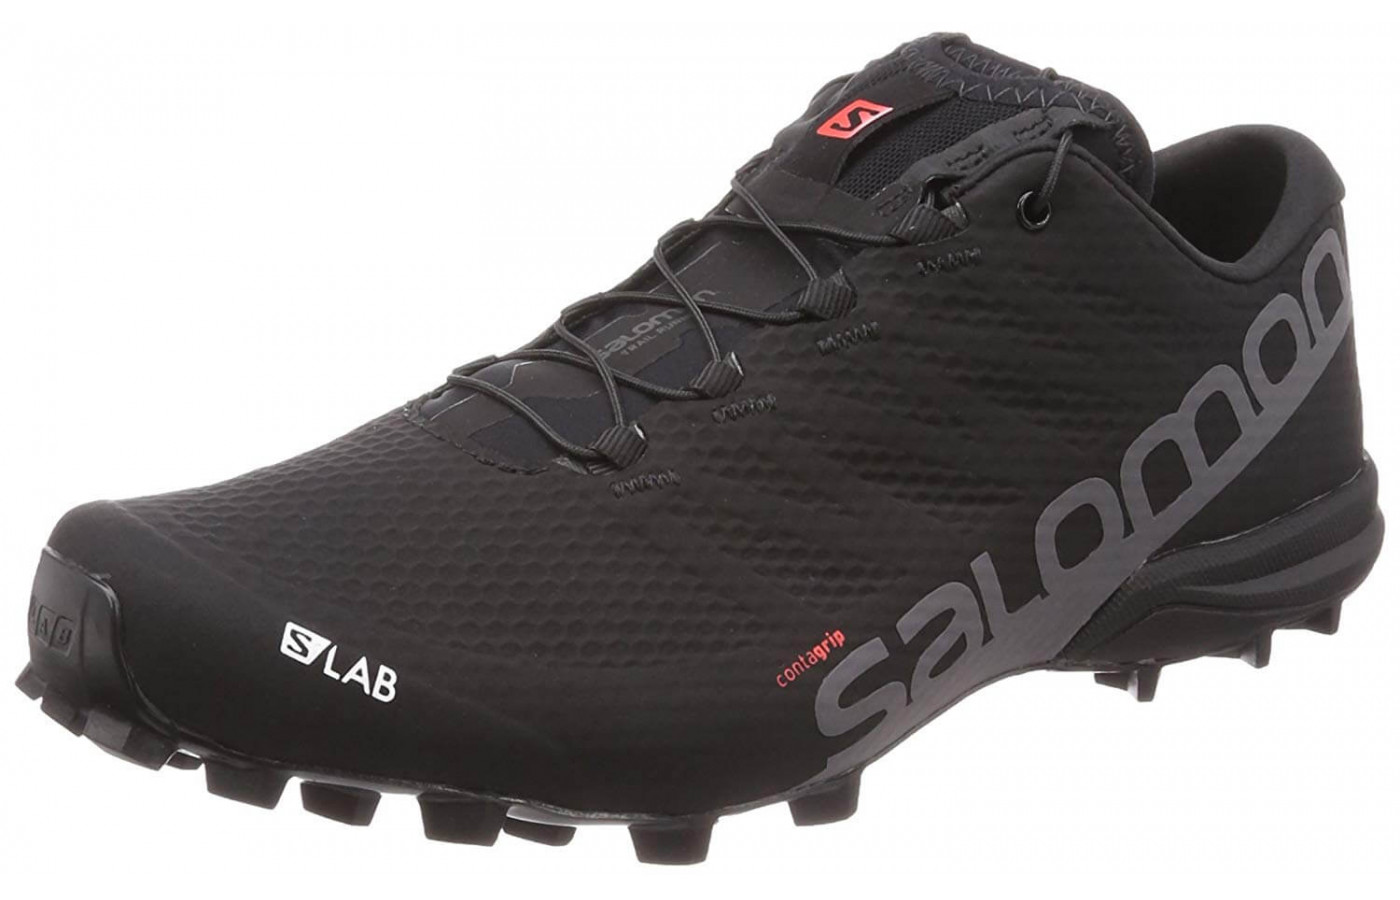 The S-Lab Speed 2 is only available in black.